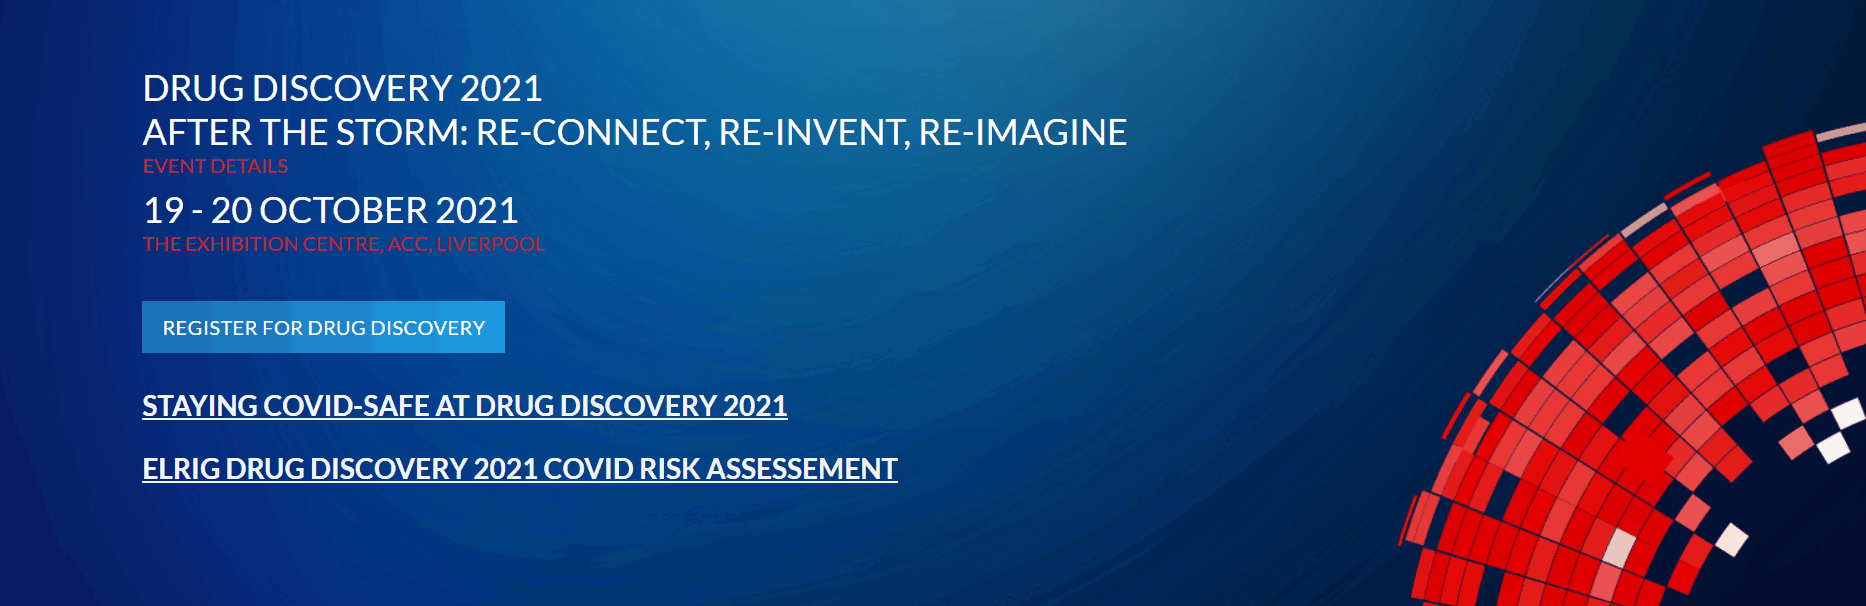 ELRIG Drug Discovery 2021 AFTER THE STORM RECONNECT, REINVENT, RE